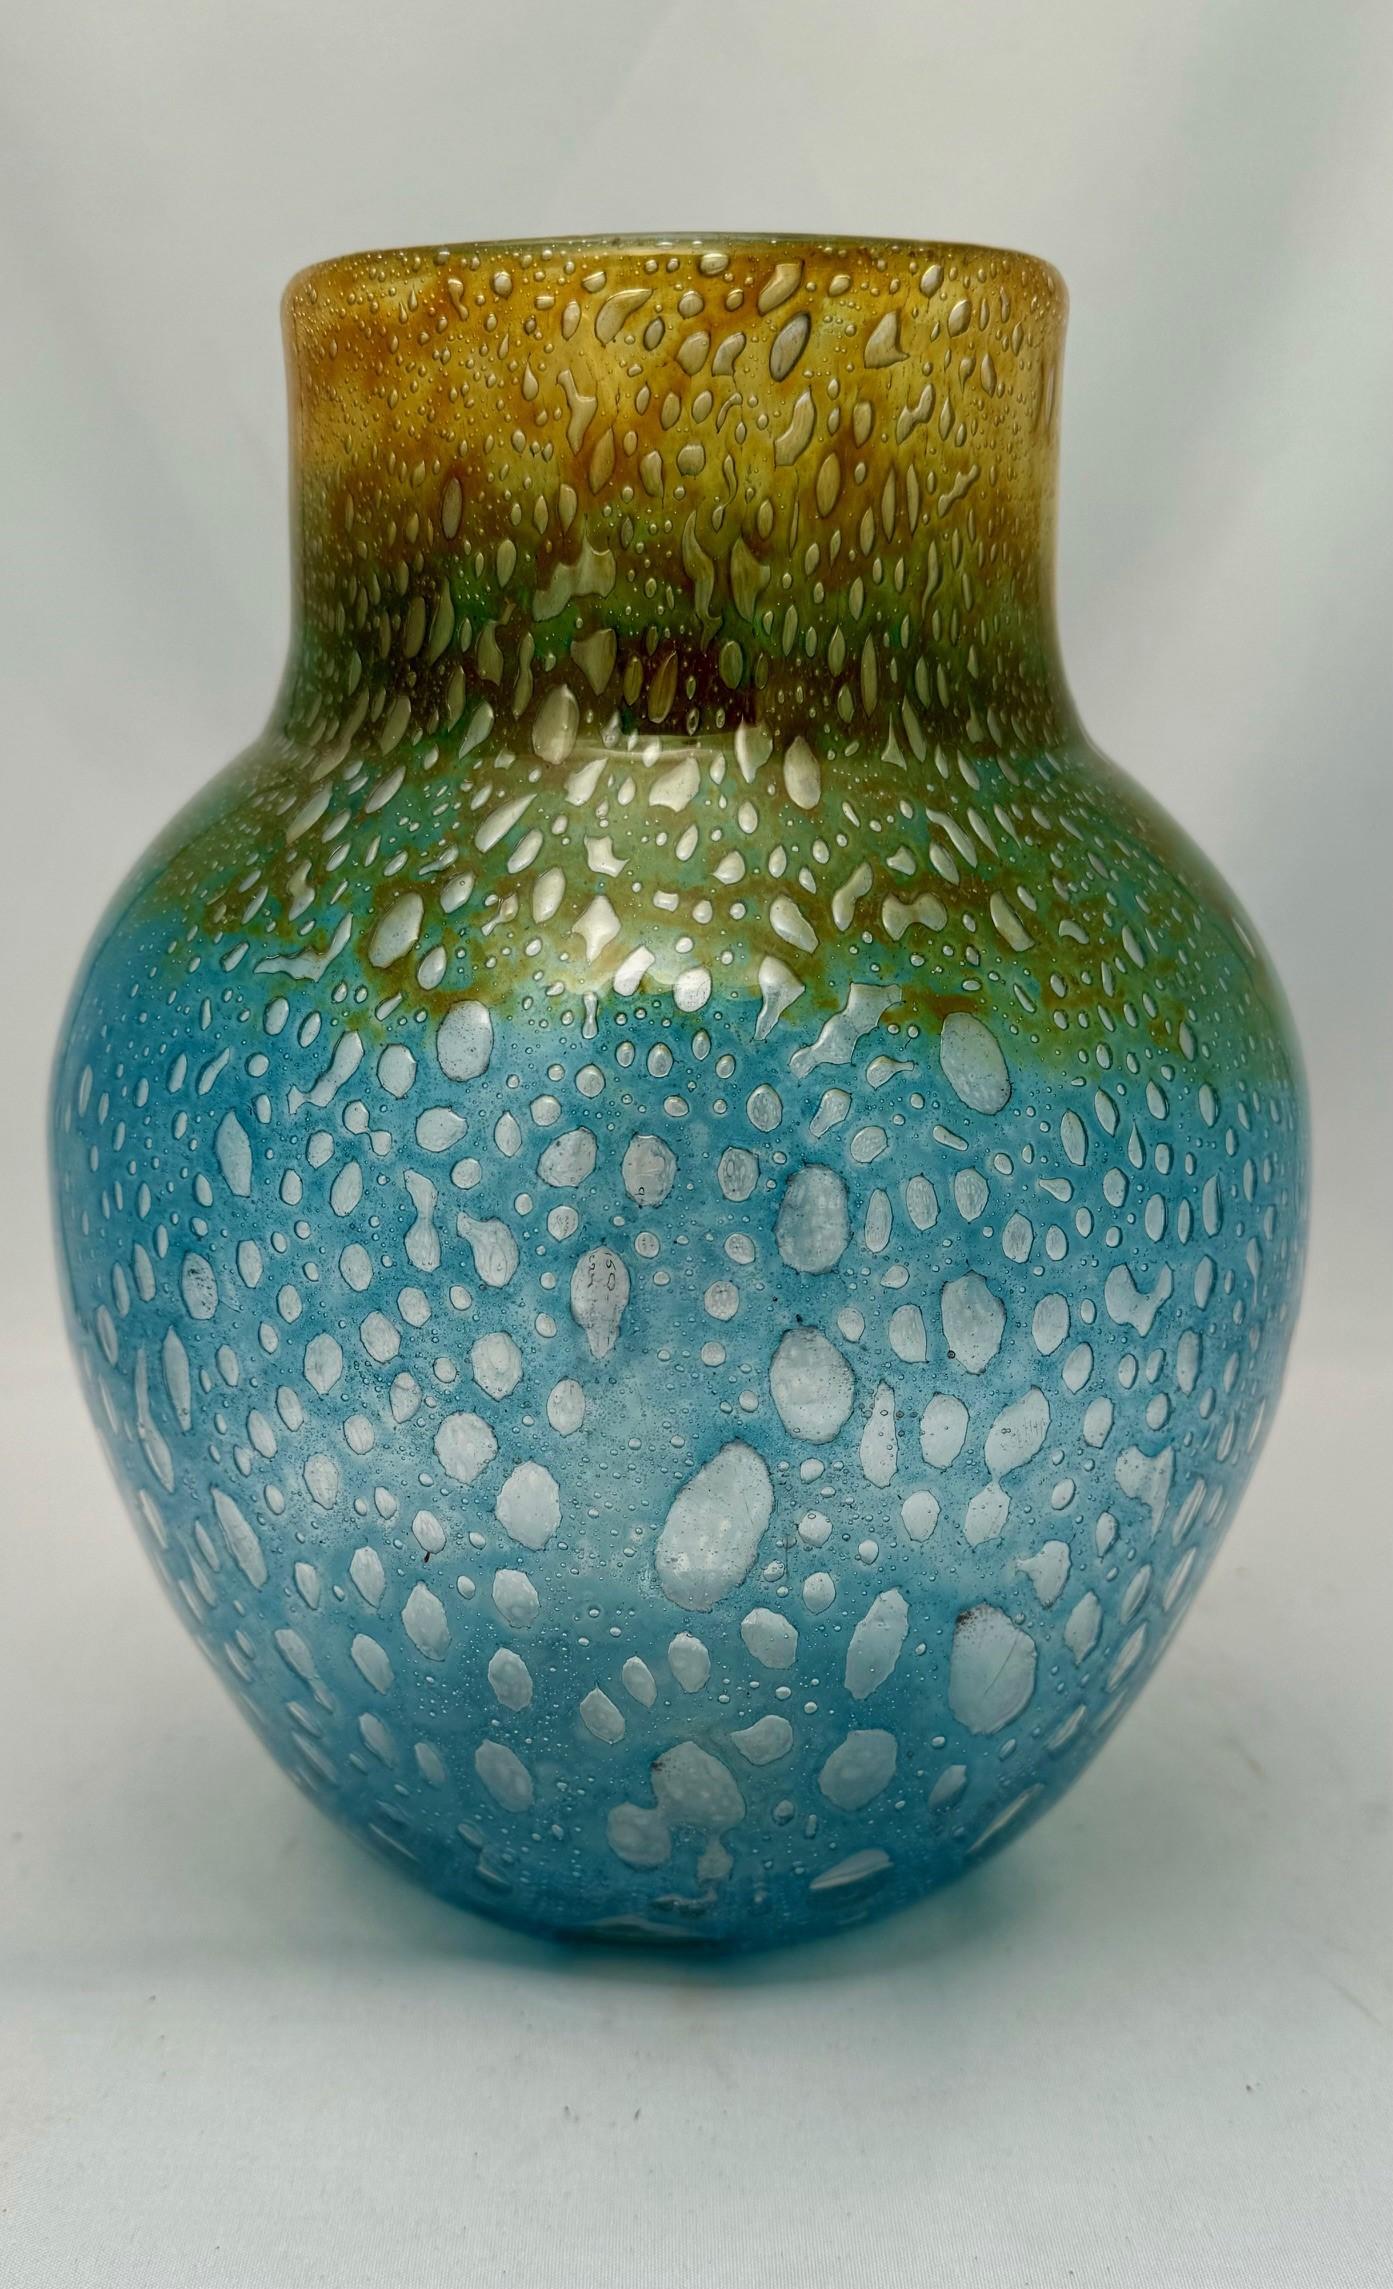 This large Monart vase with entrancing colors and textures,
the blue ground with evolving clear bubbles rise to the top in a fizzing amber fusion. Beauty in glass suitable for a stand alone piece or in collection.